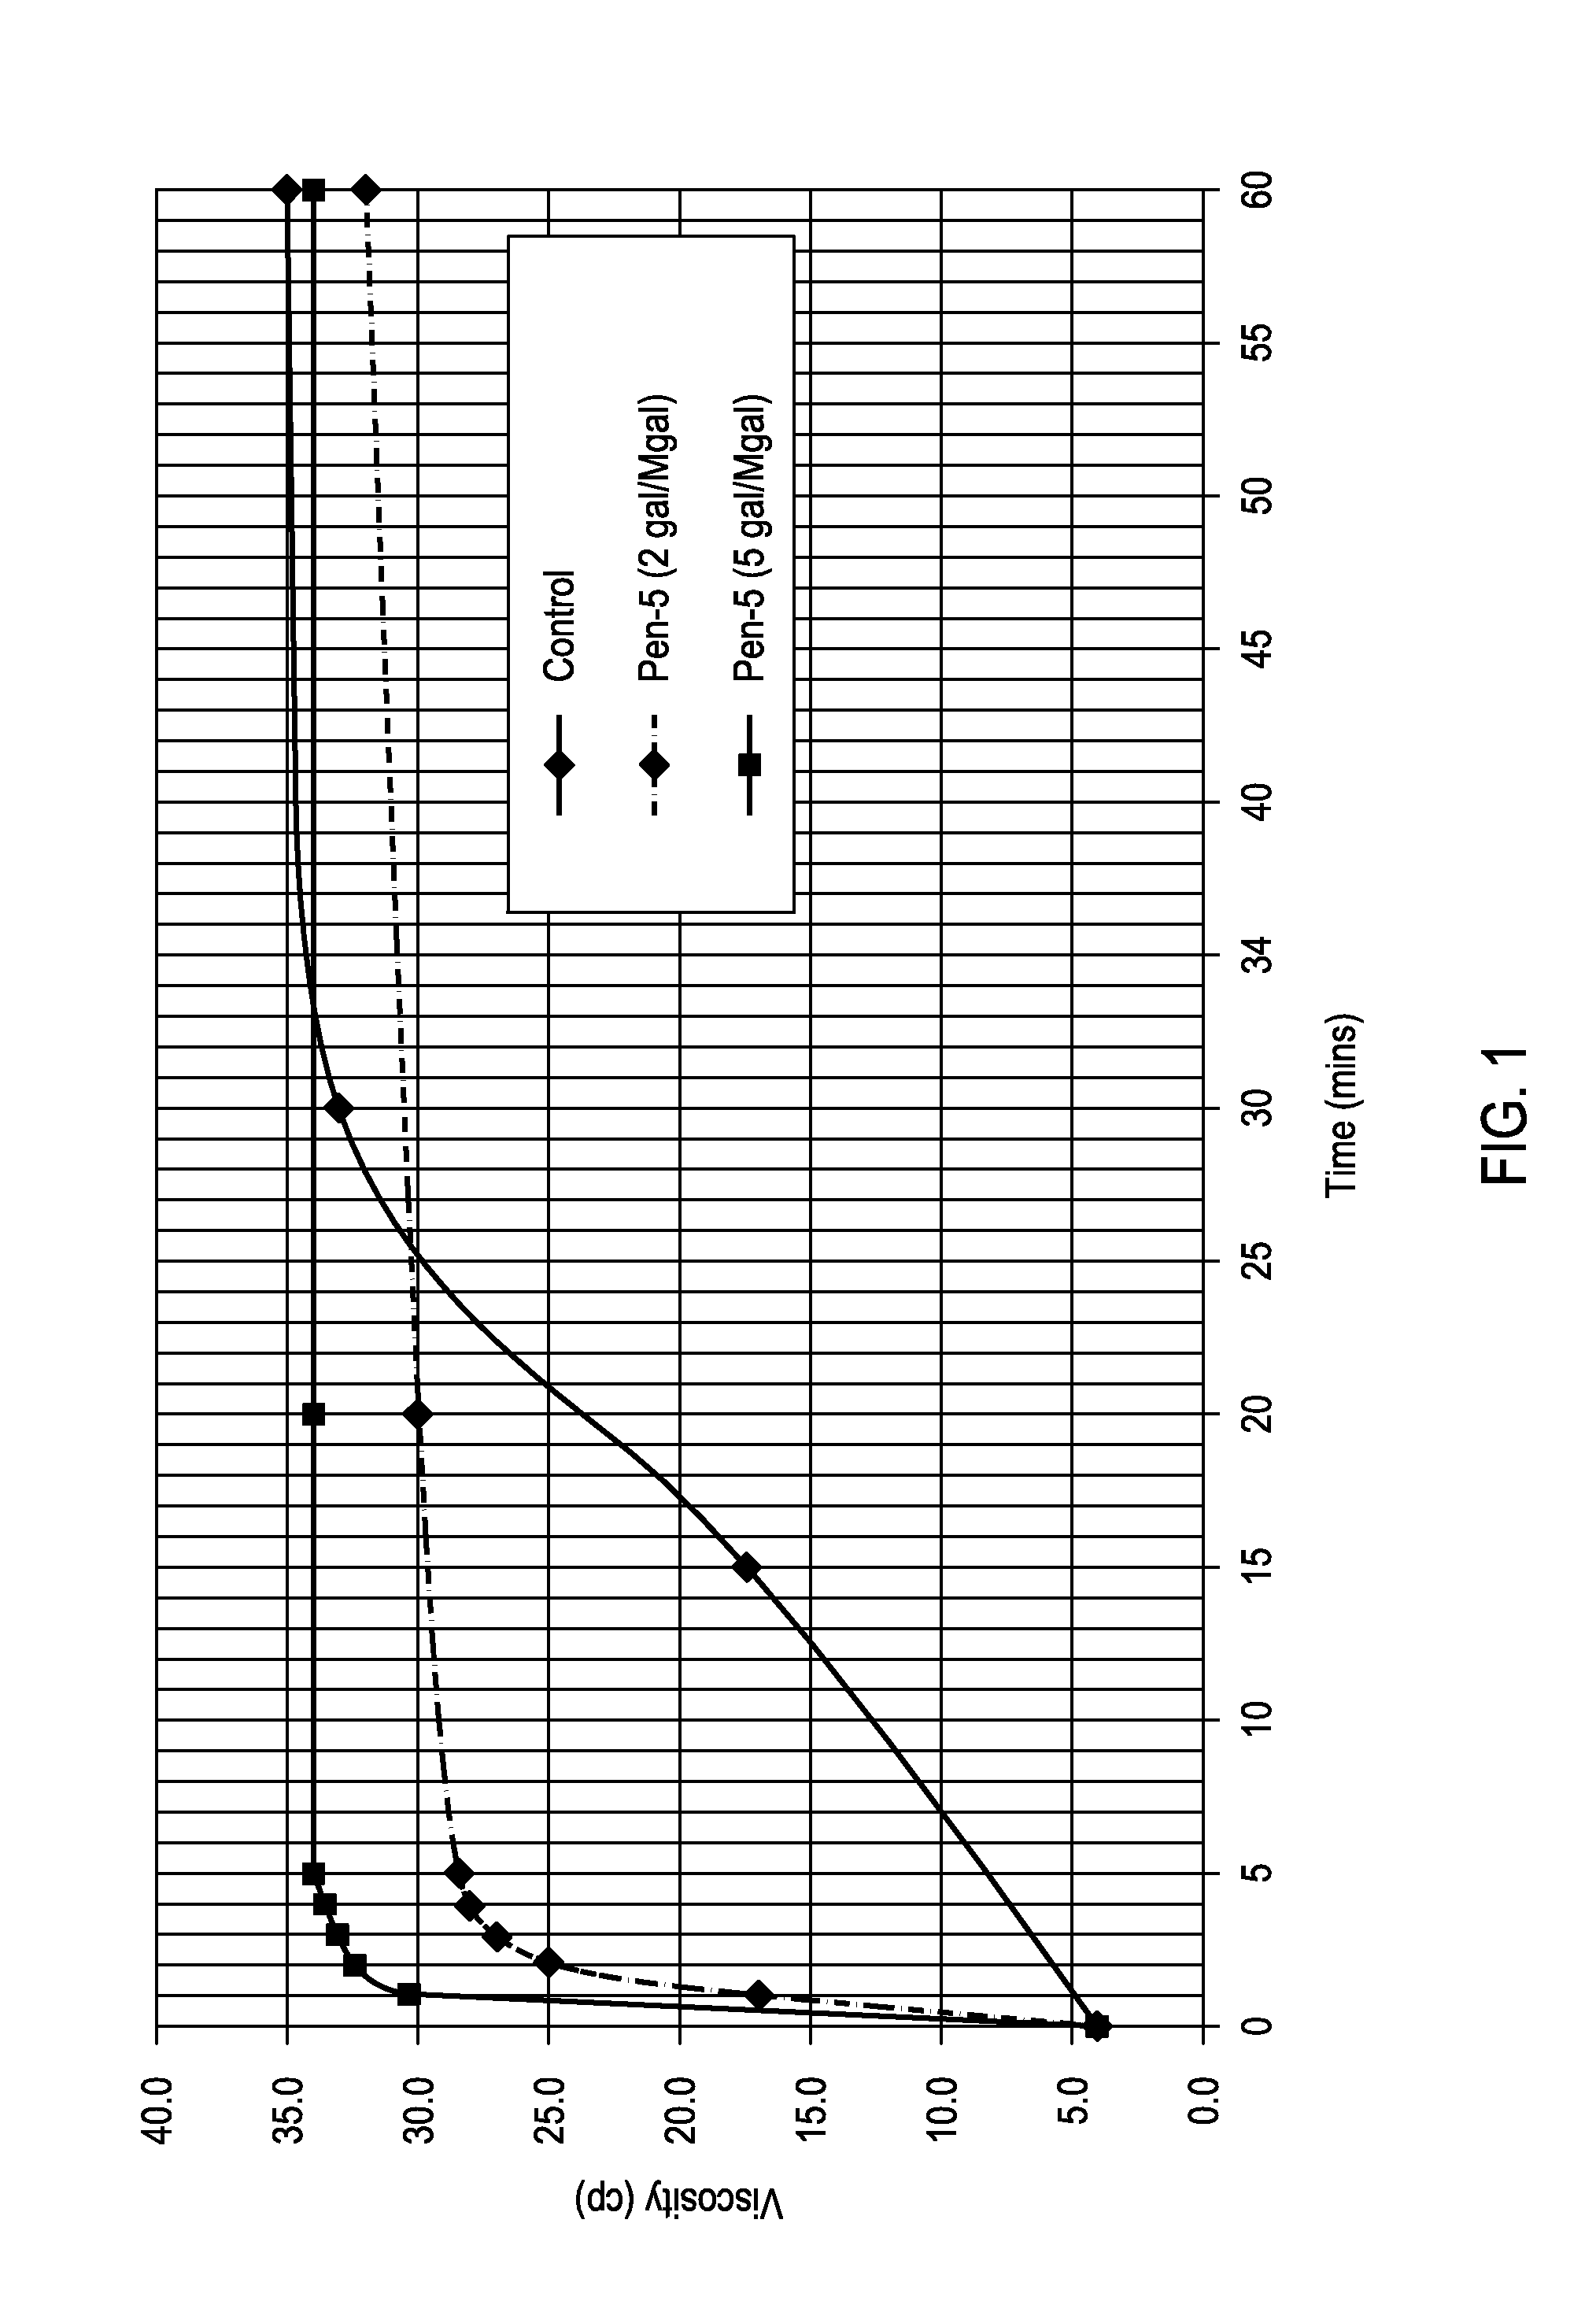 Hydration Acceleration Surfactants in Conjunction with High Molecular Weight Polymers, and Methods and Compositions Relating Thereto